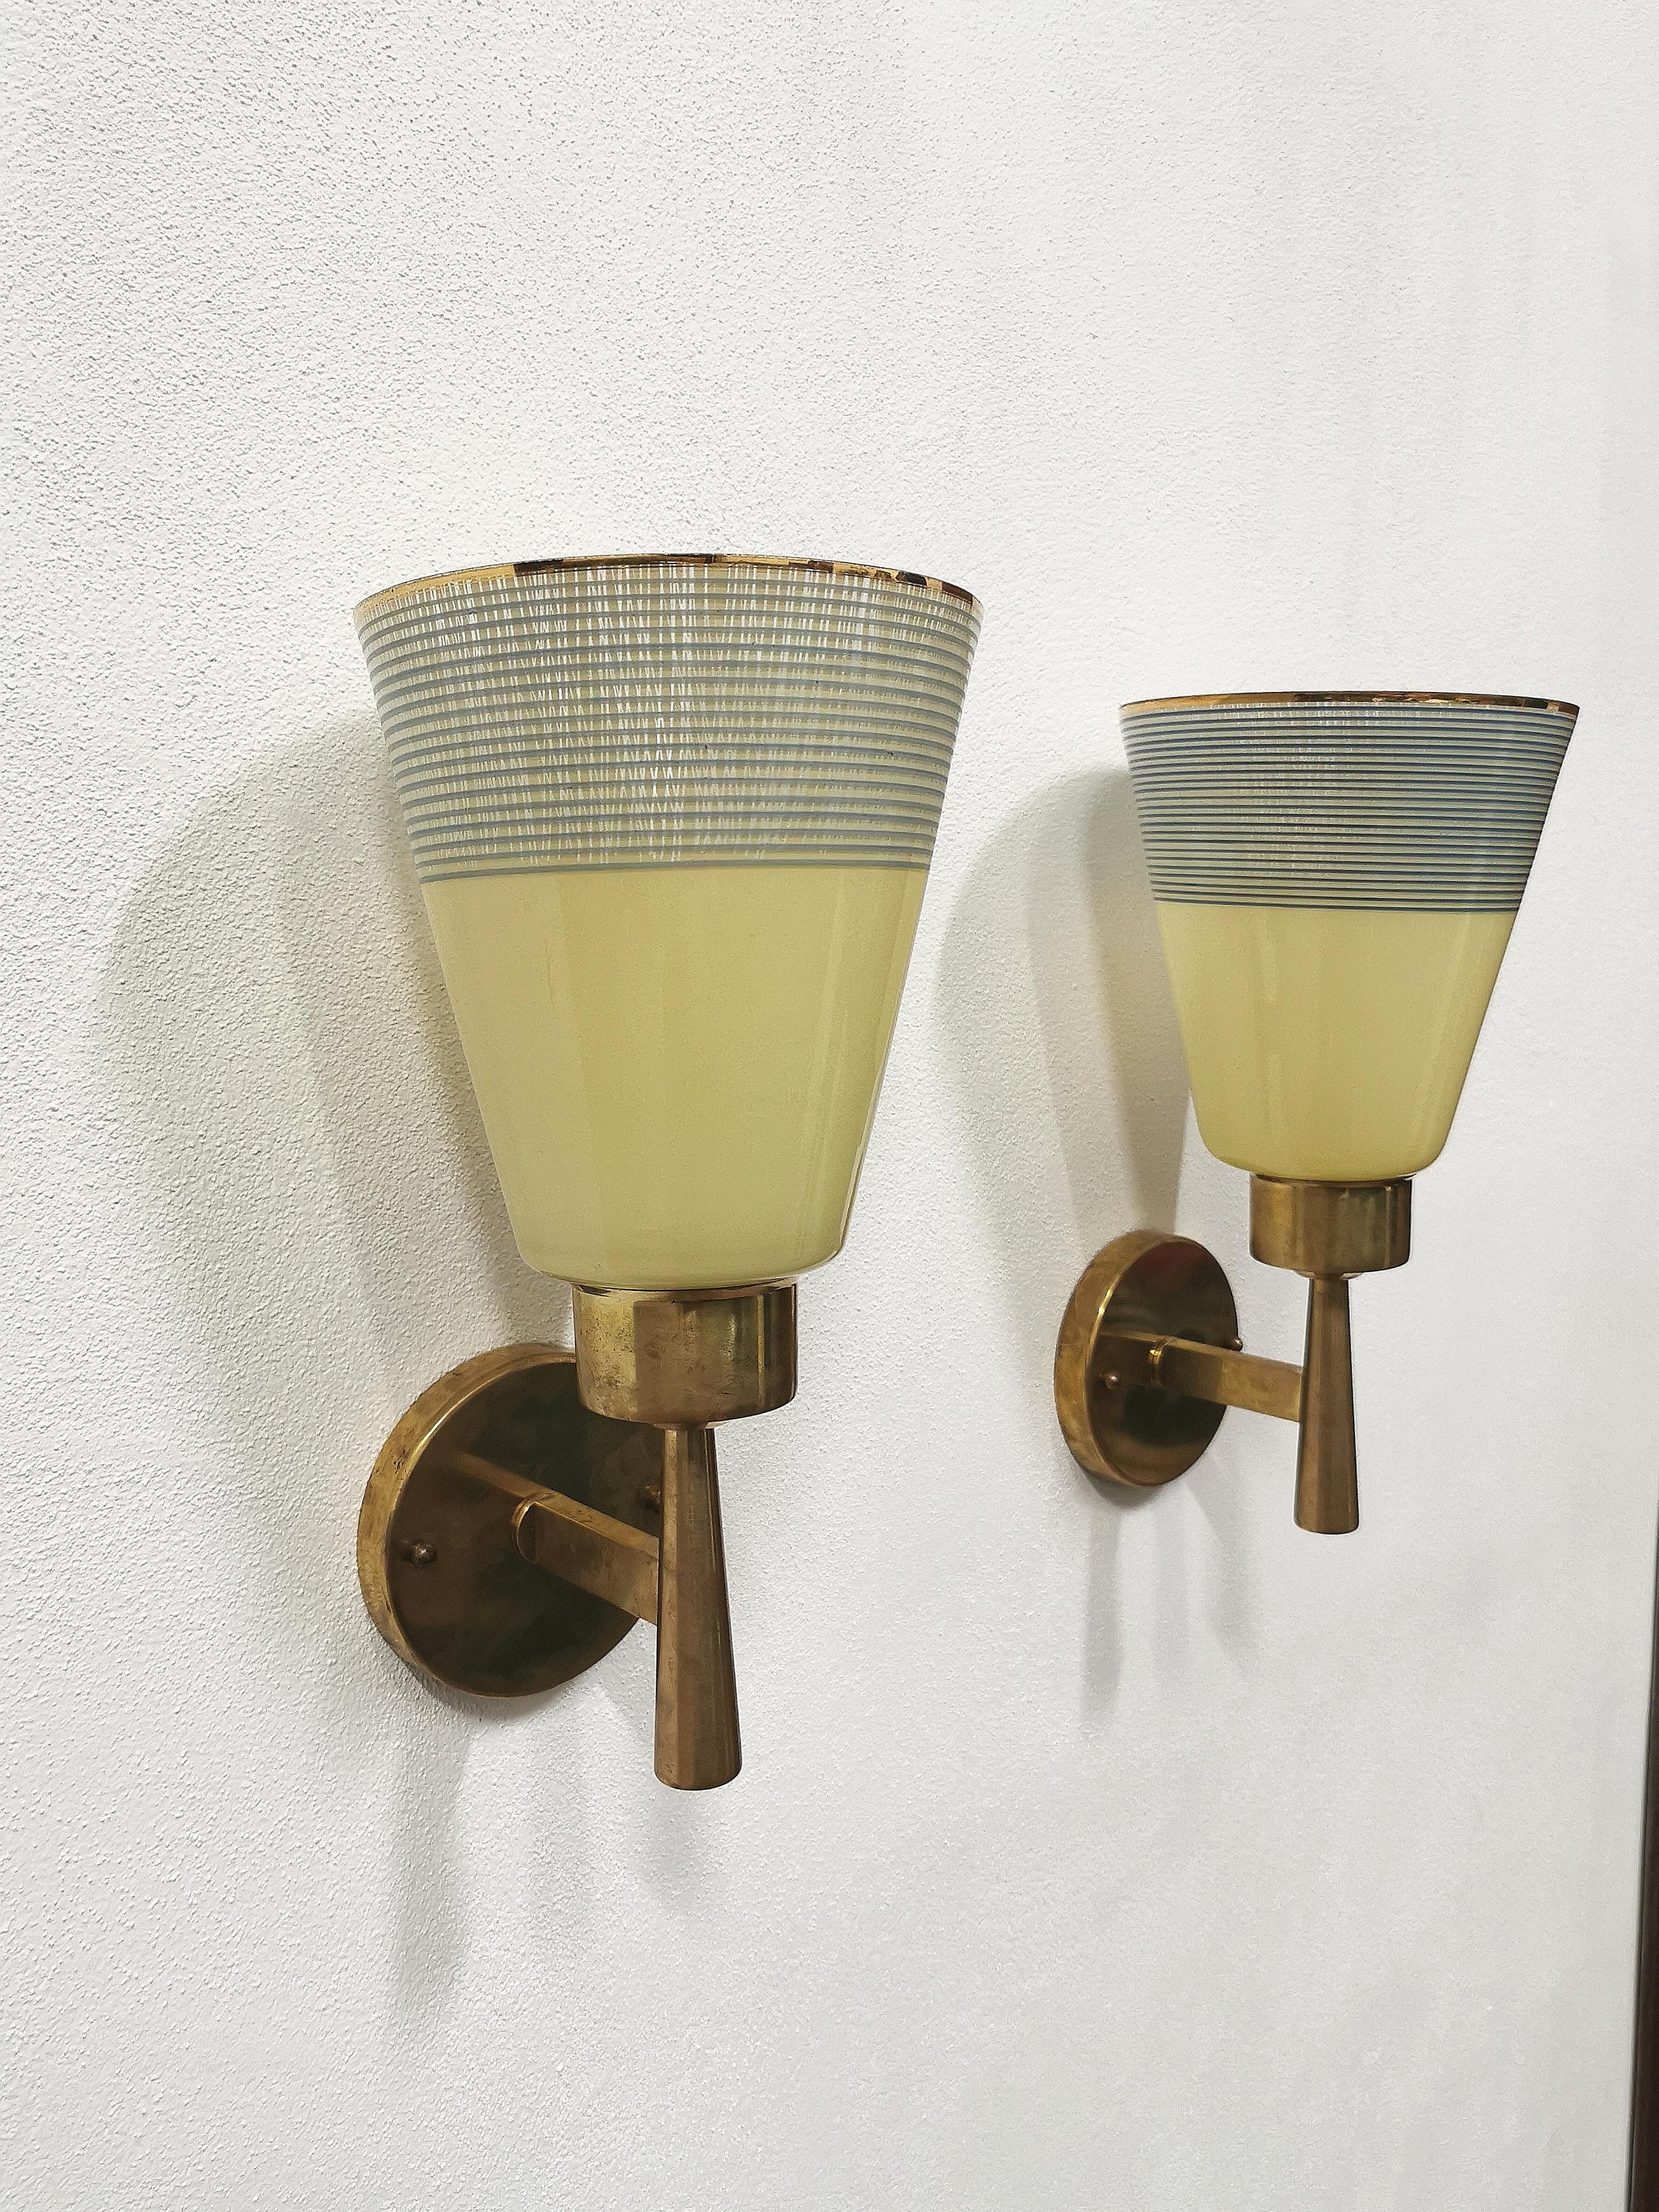 Pair of wall lights with diffuser in yellow crystal glass decorated with light blue stripes and gold trim on the upper part of the diffuser. Brass structure, Italian production of the 1950s.